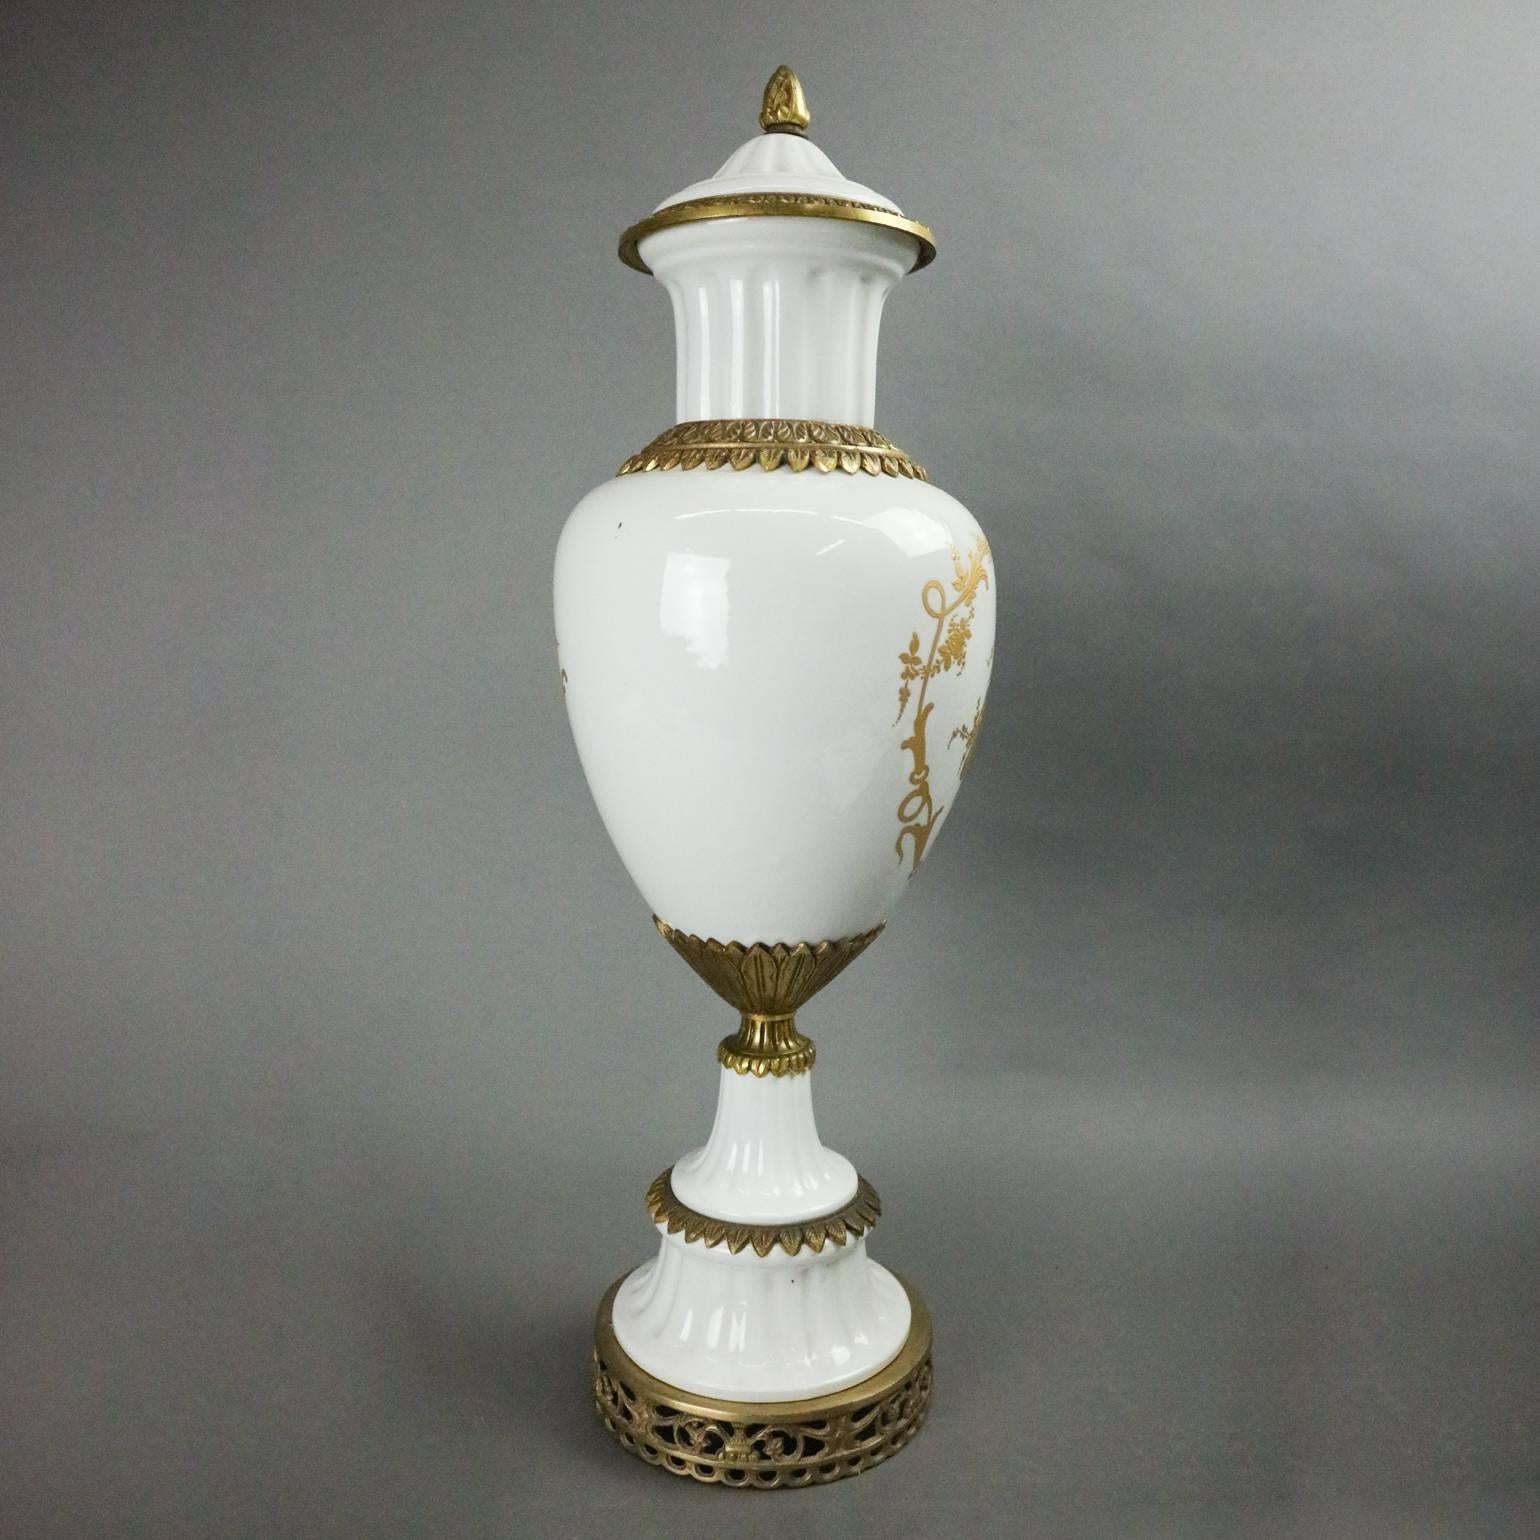 20th Century French Neoclassical Gilt Porcelain & Bronze Urn Signed Sevres, circa 1940